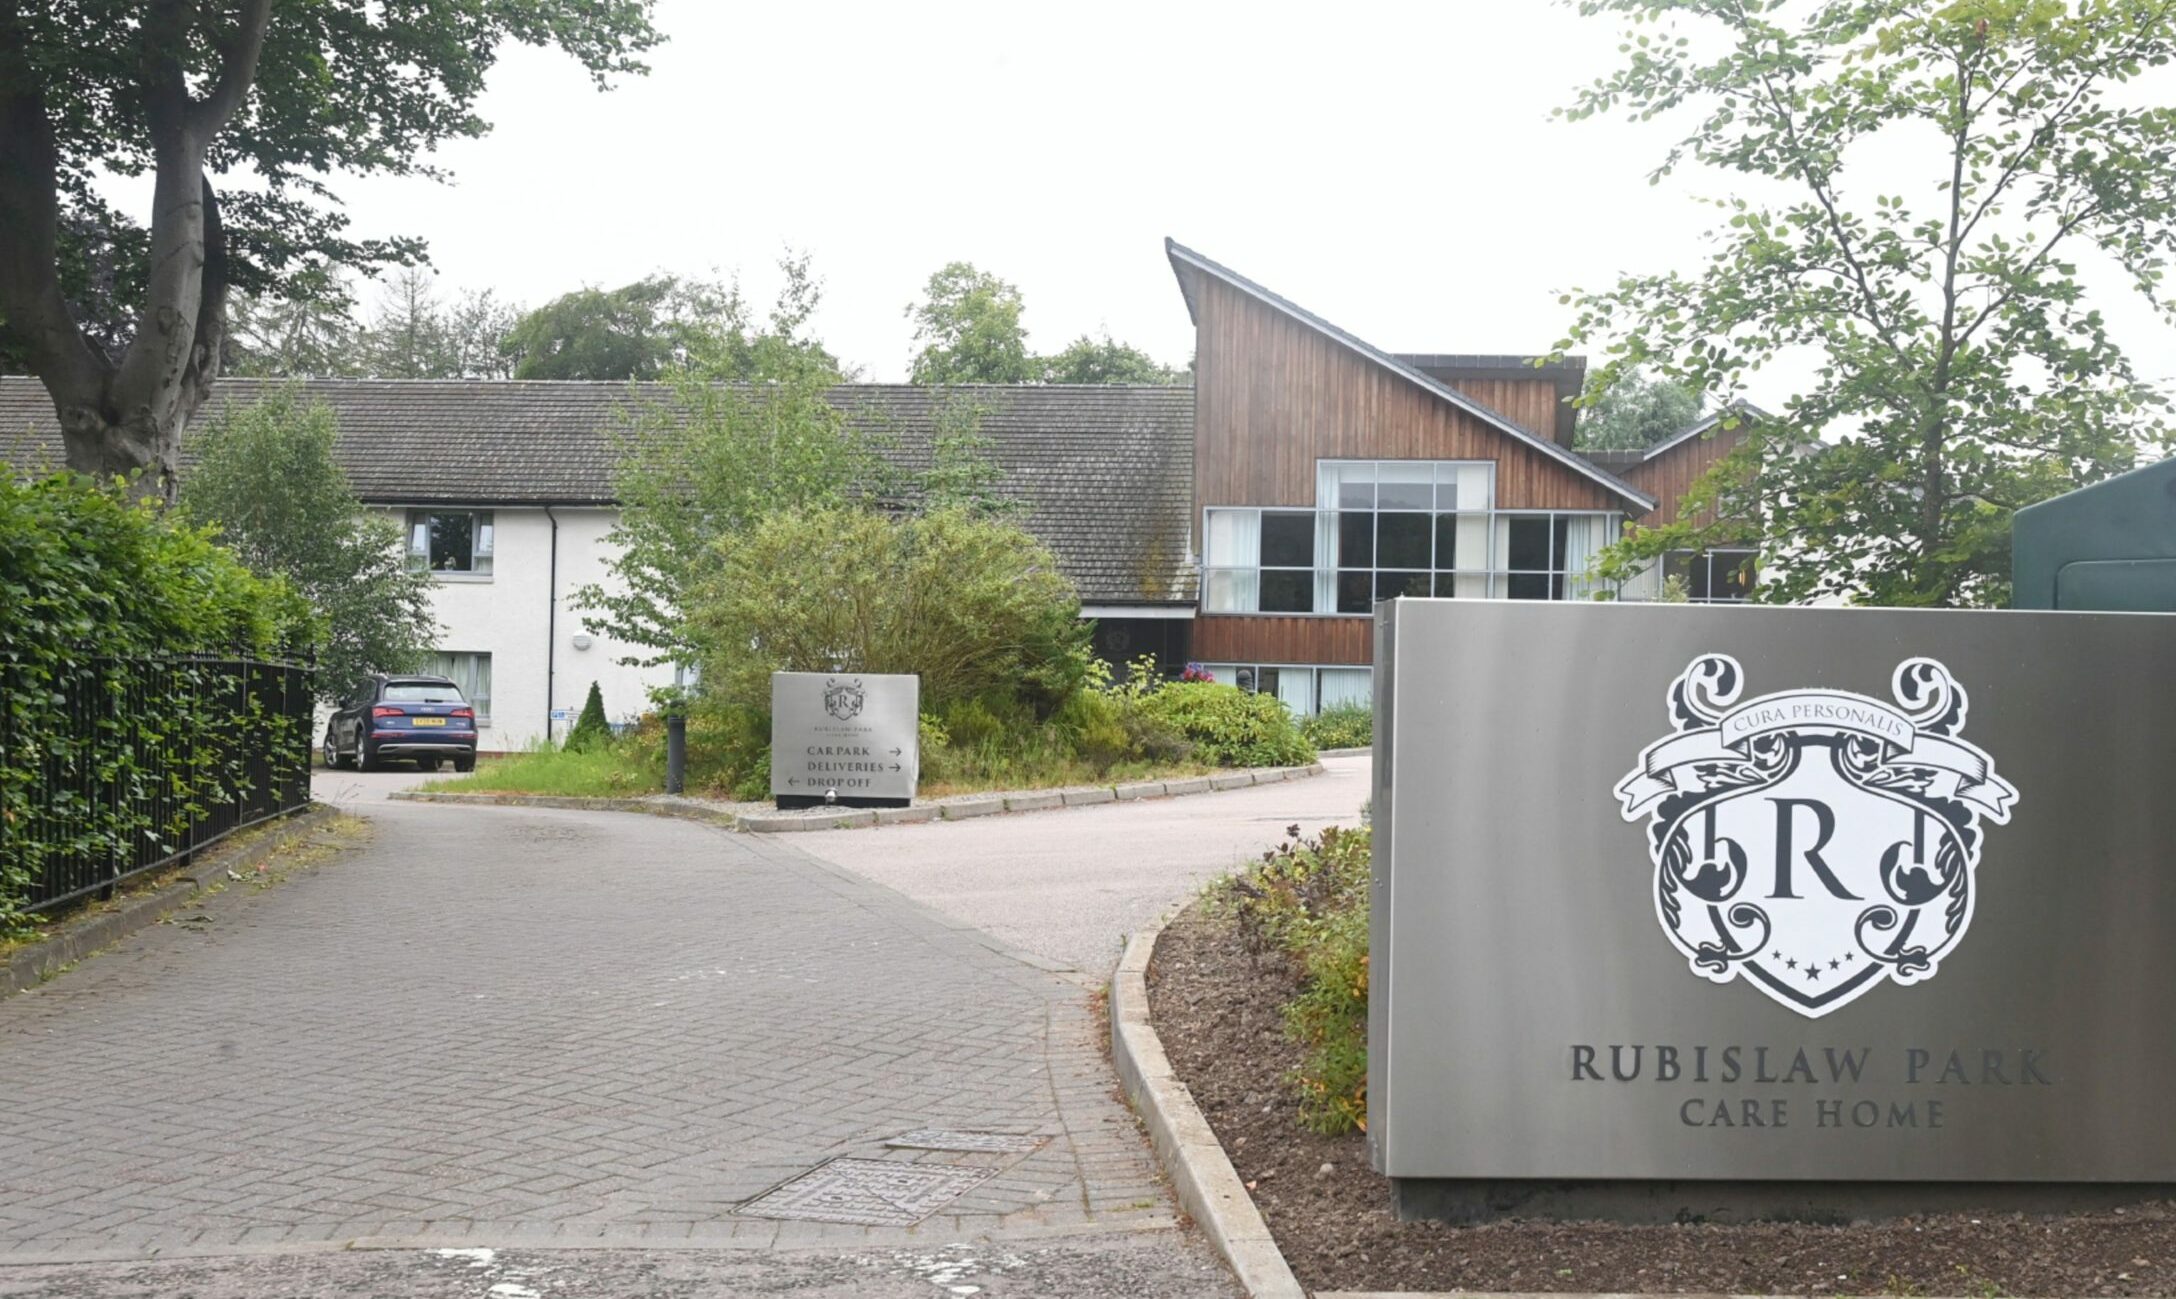 Rubislaw Park Care Home. Picture by Chris Sumner